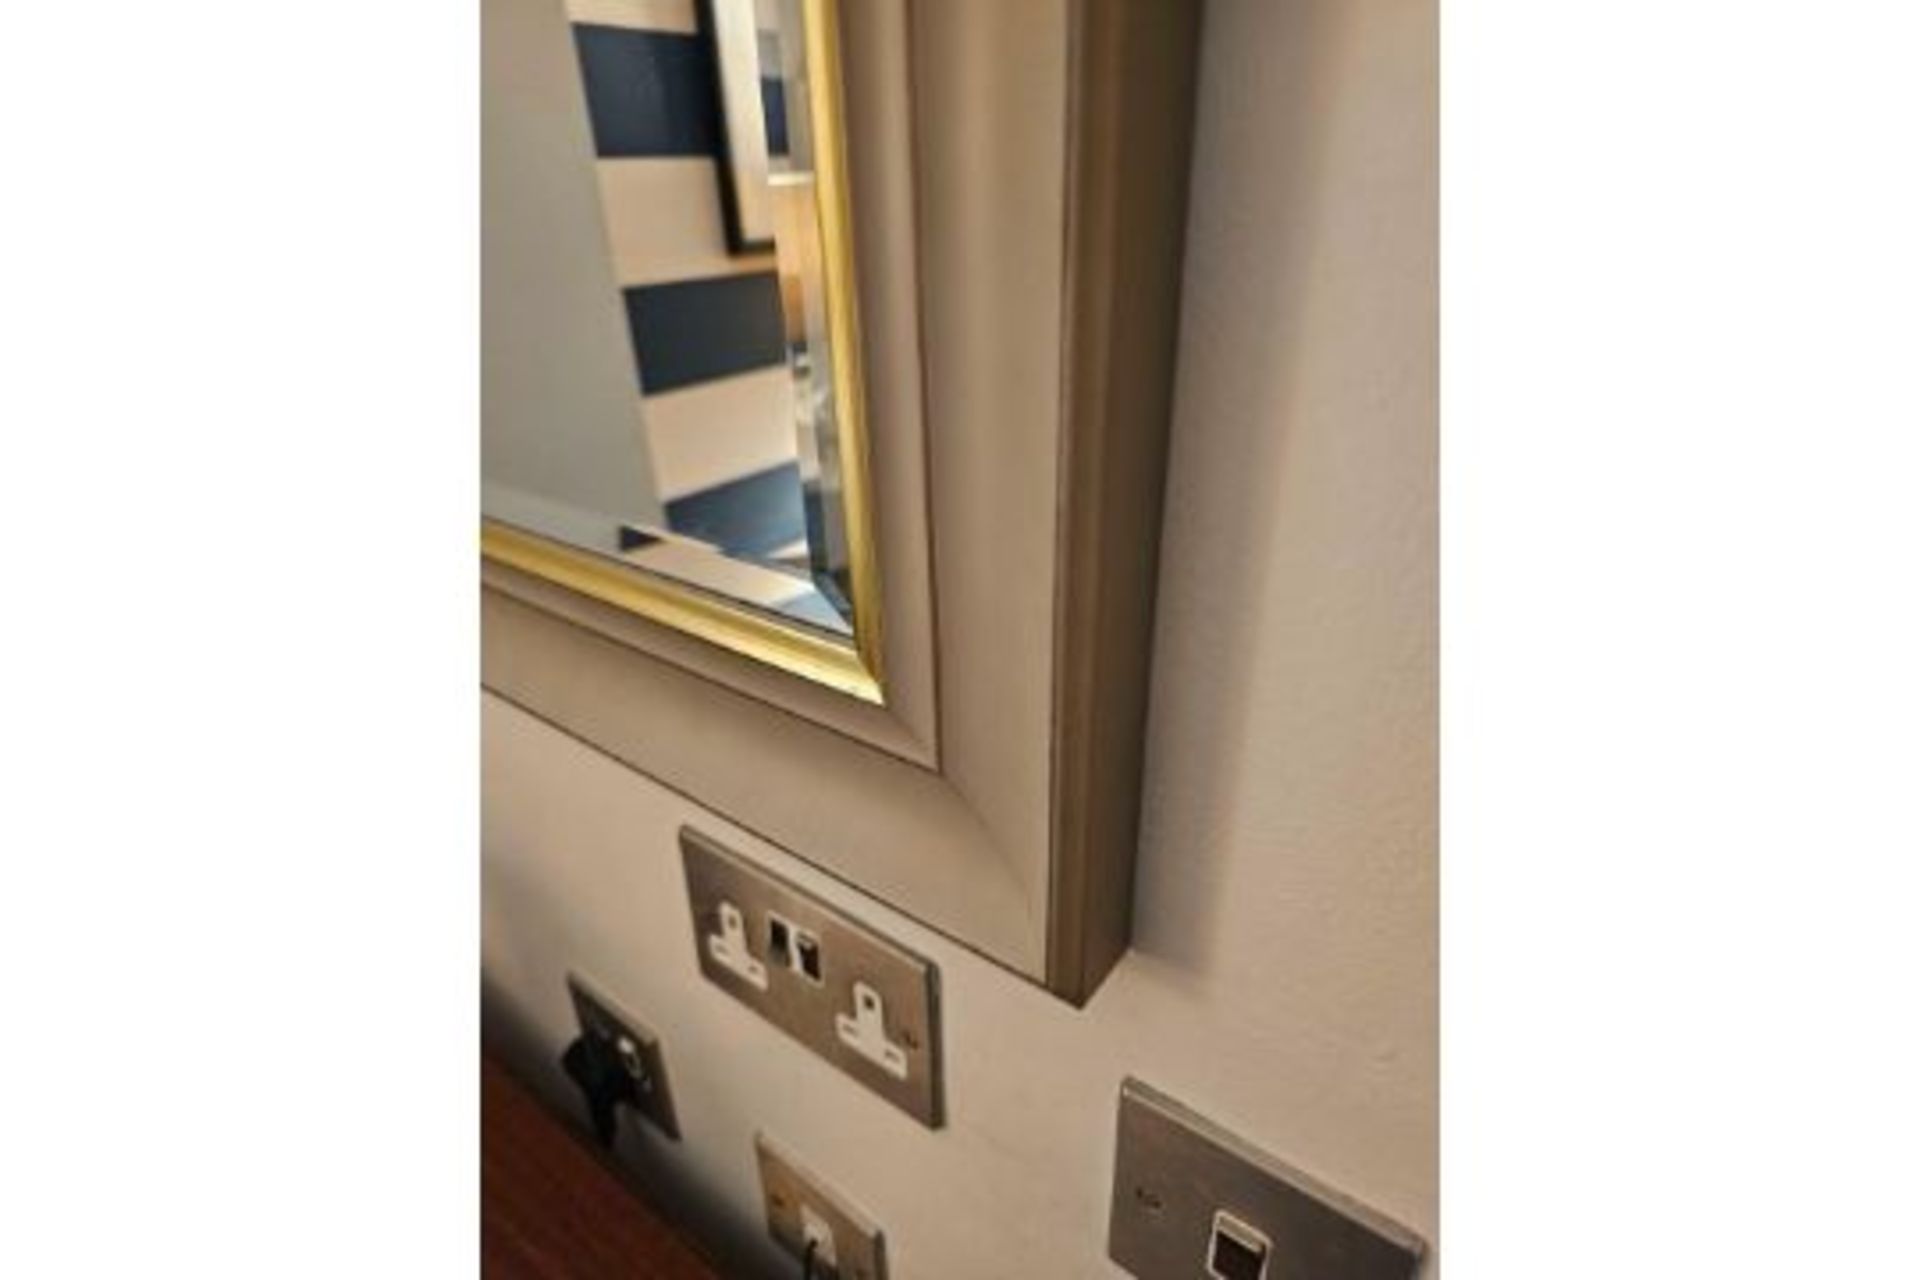 Modern Bevelled Accent Mirror Grey Timber Frame With Gold Trim Detailing 70 x 100cm - Image 2 of 2